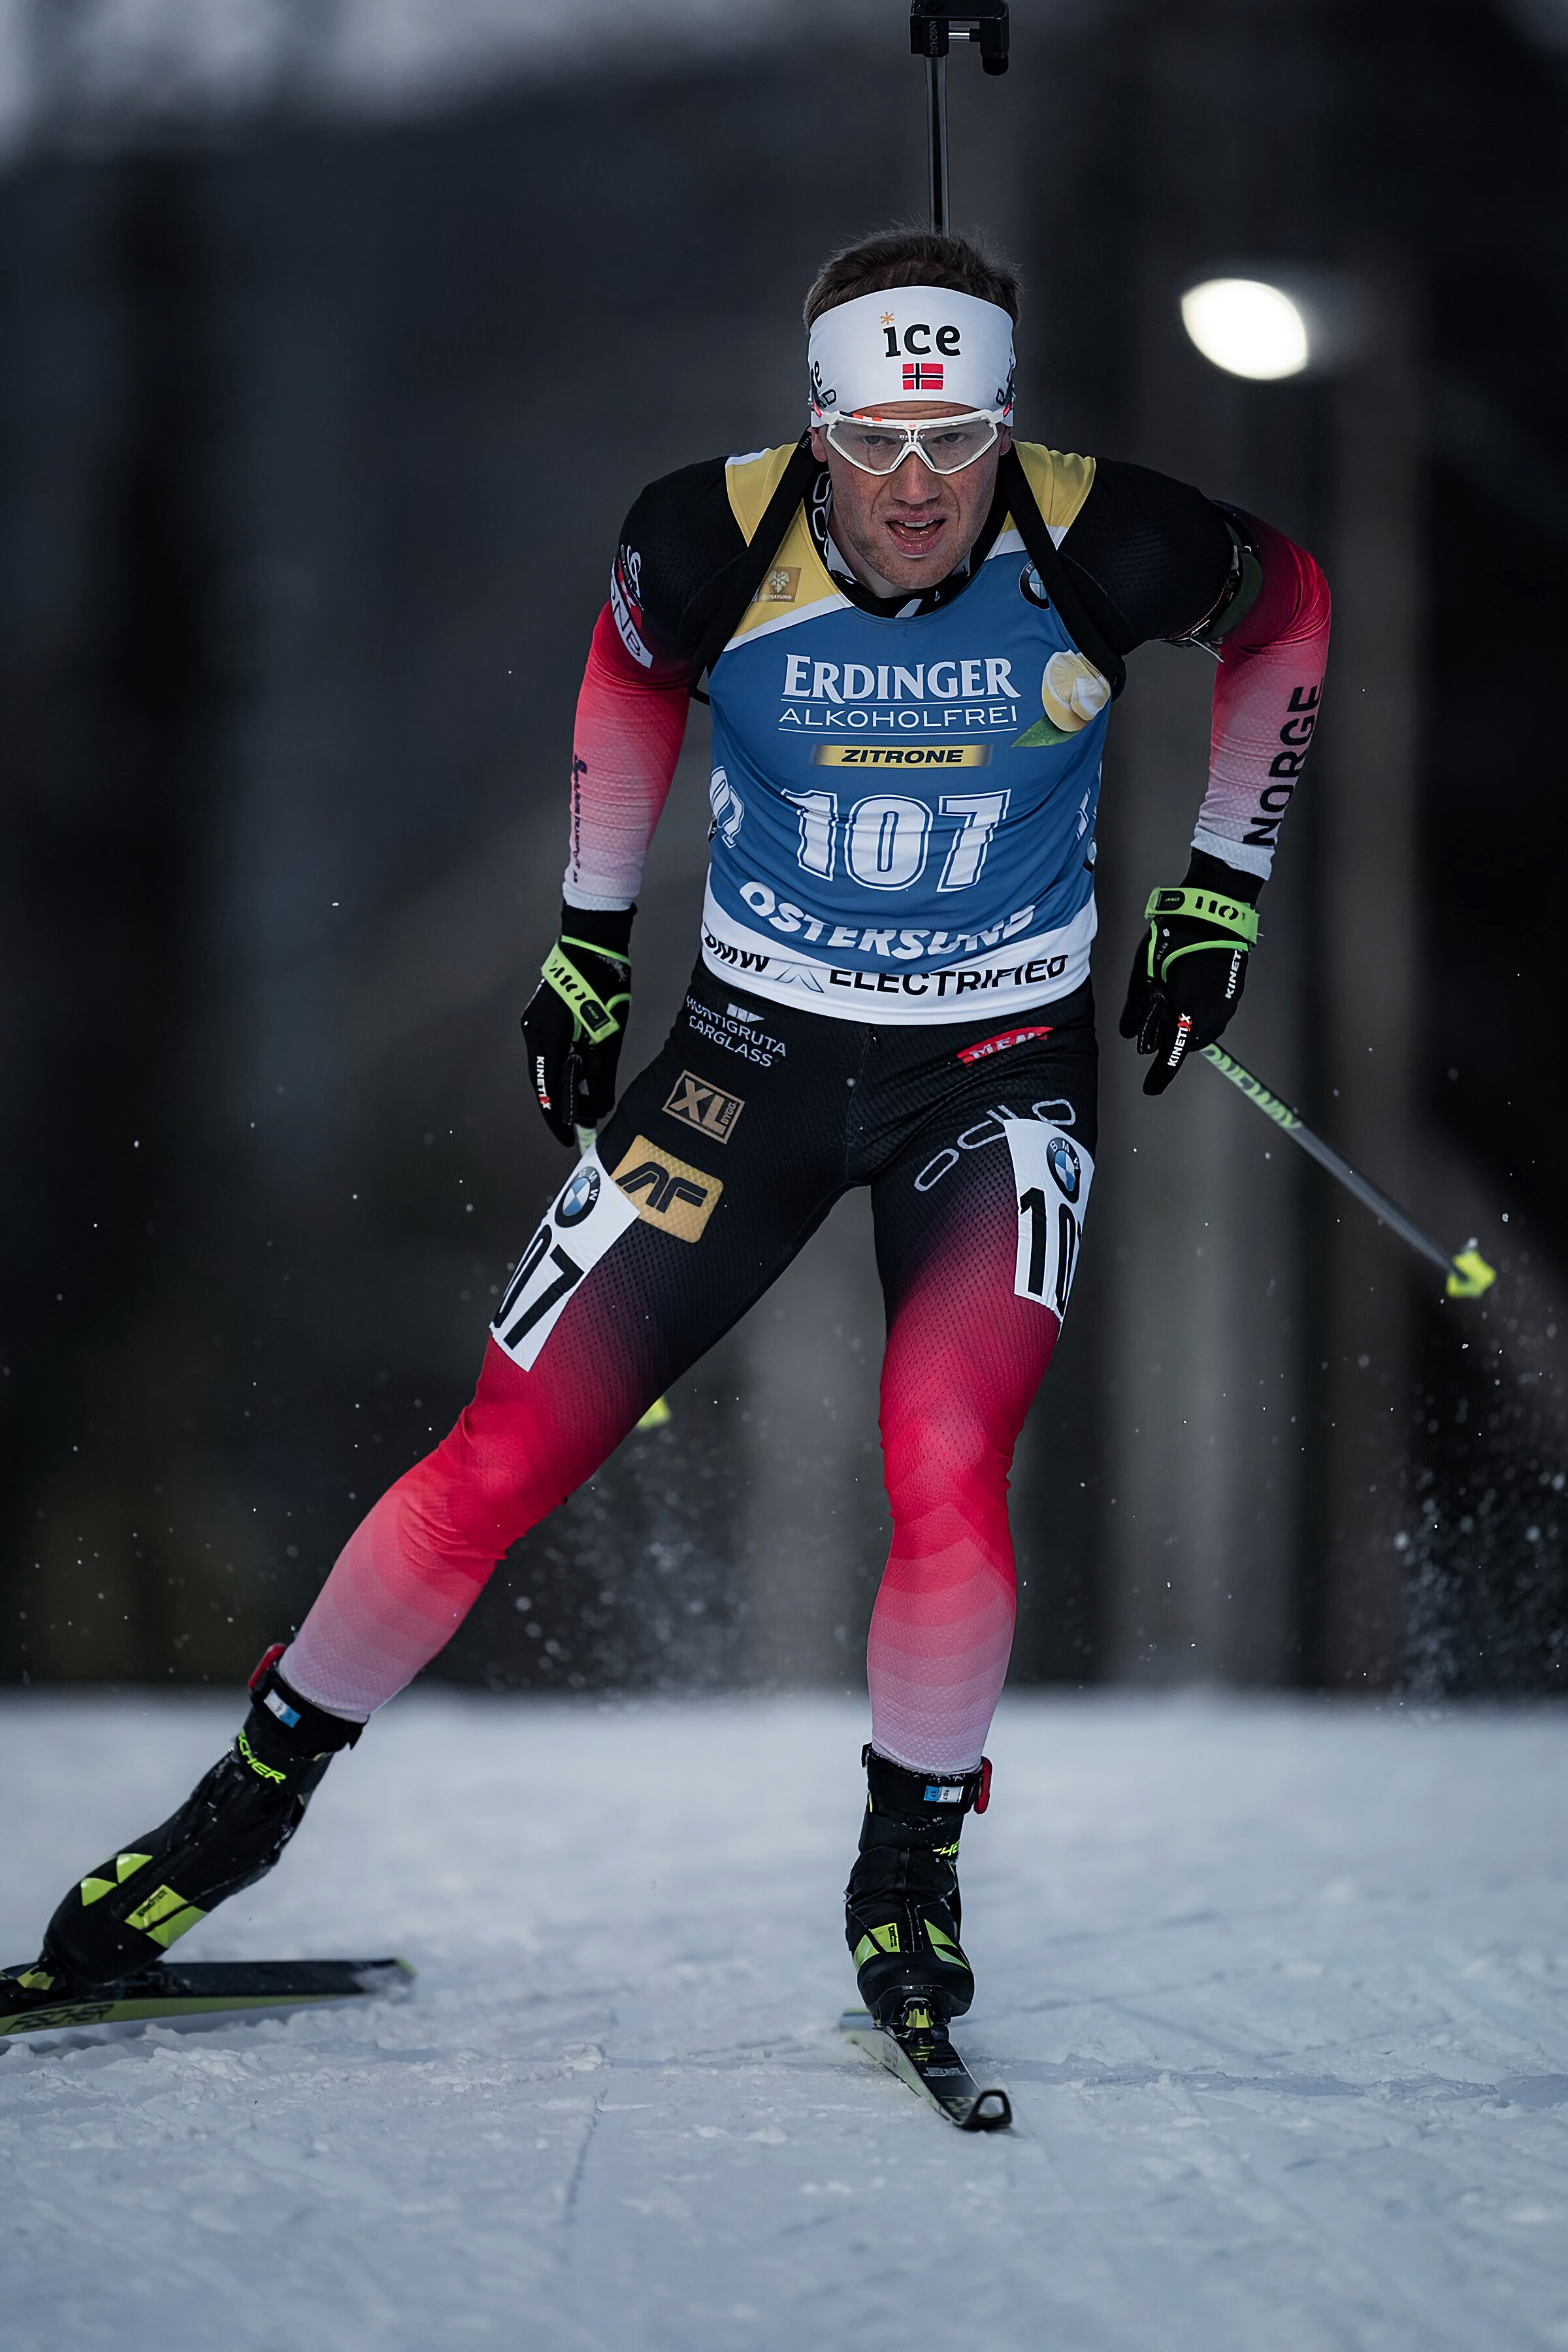 Johannes Dale, Nordic skiing talents, Cross-country races, Athlete's journey, 2400x3600 4K Handy